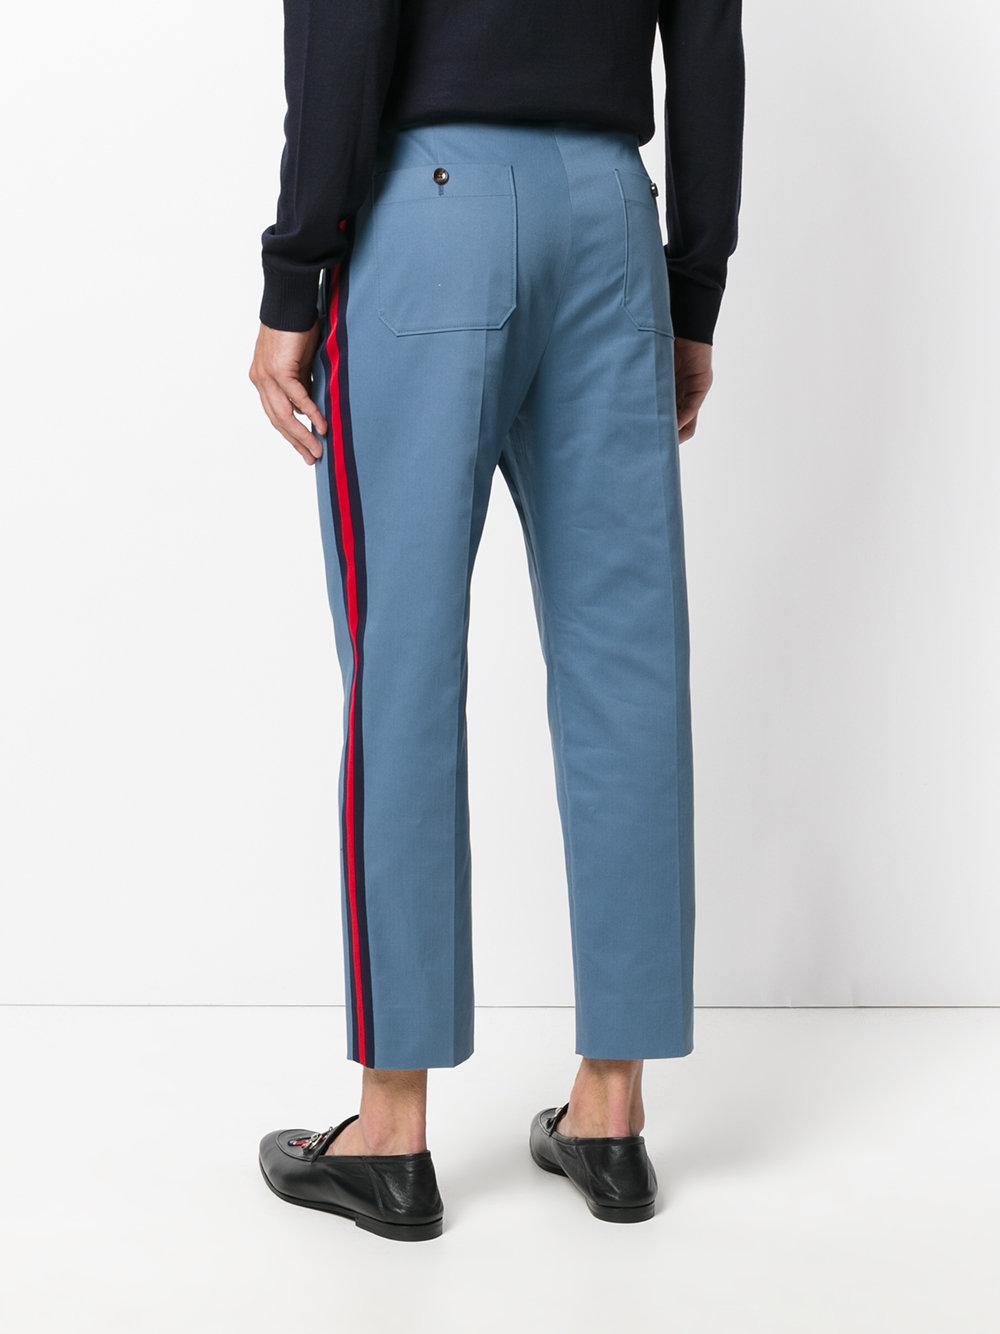 gucci trousers mens, OFF 72%,www 